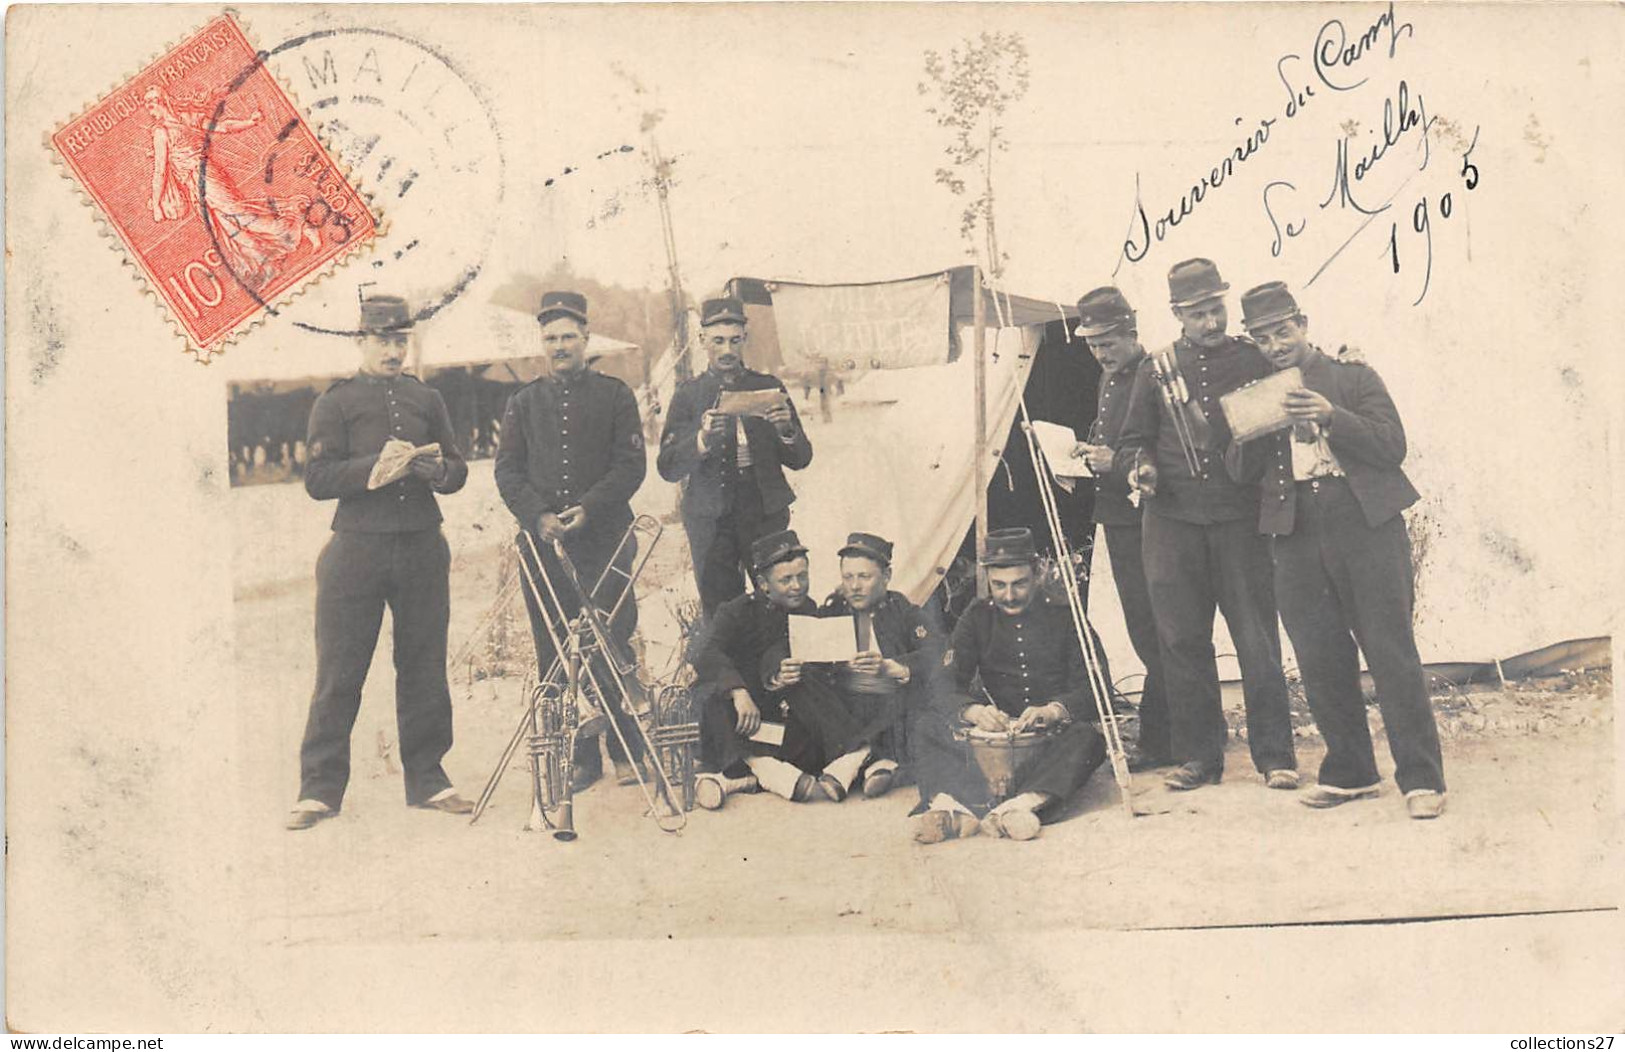 10-MAILLY-CAMP DE MAILL6 - CARTE-PHOTO- MILITAIRE SOUVENIR 1905 - Mailly-le-Camp